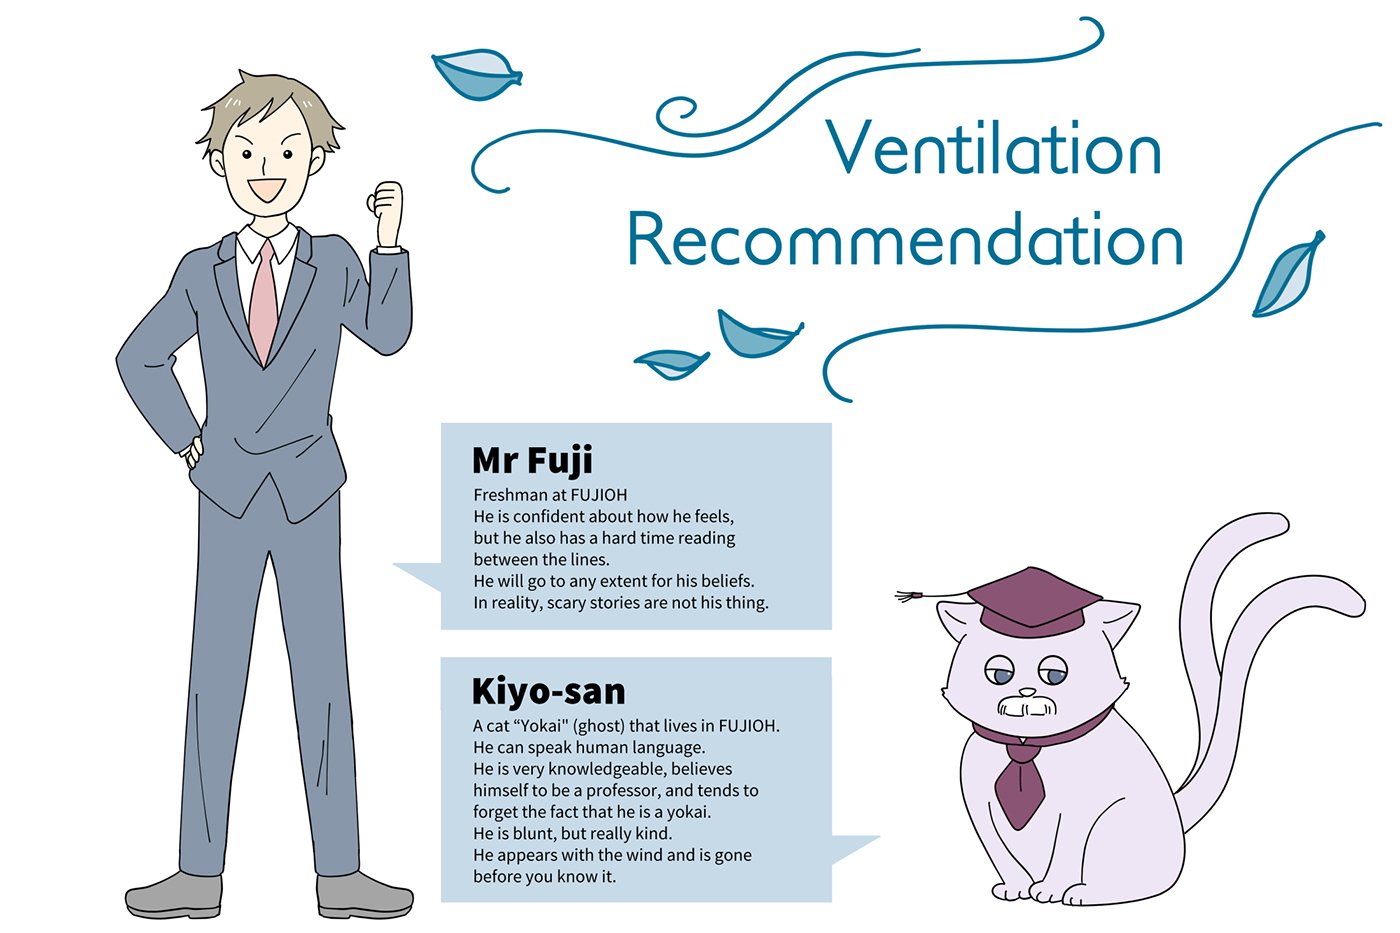 Effective ventilation after vacuuming